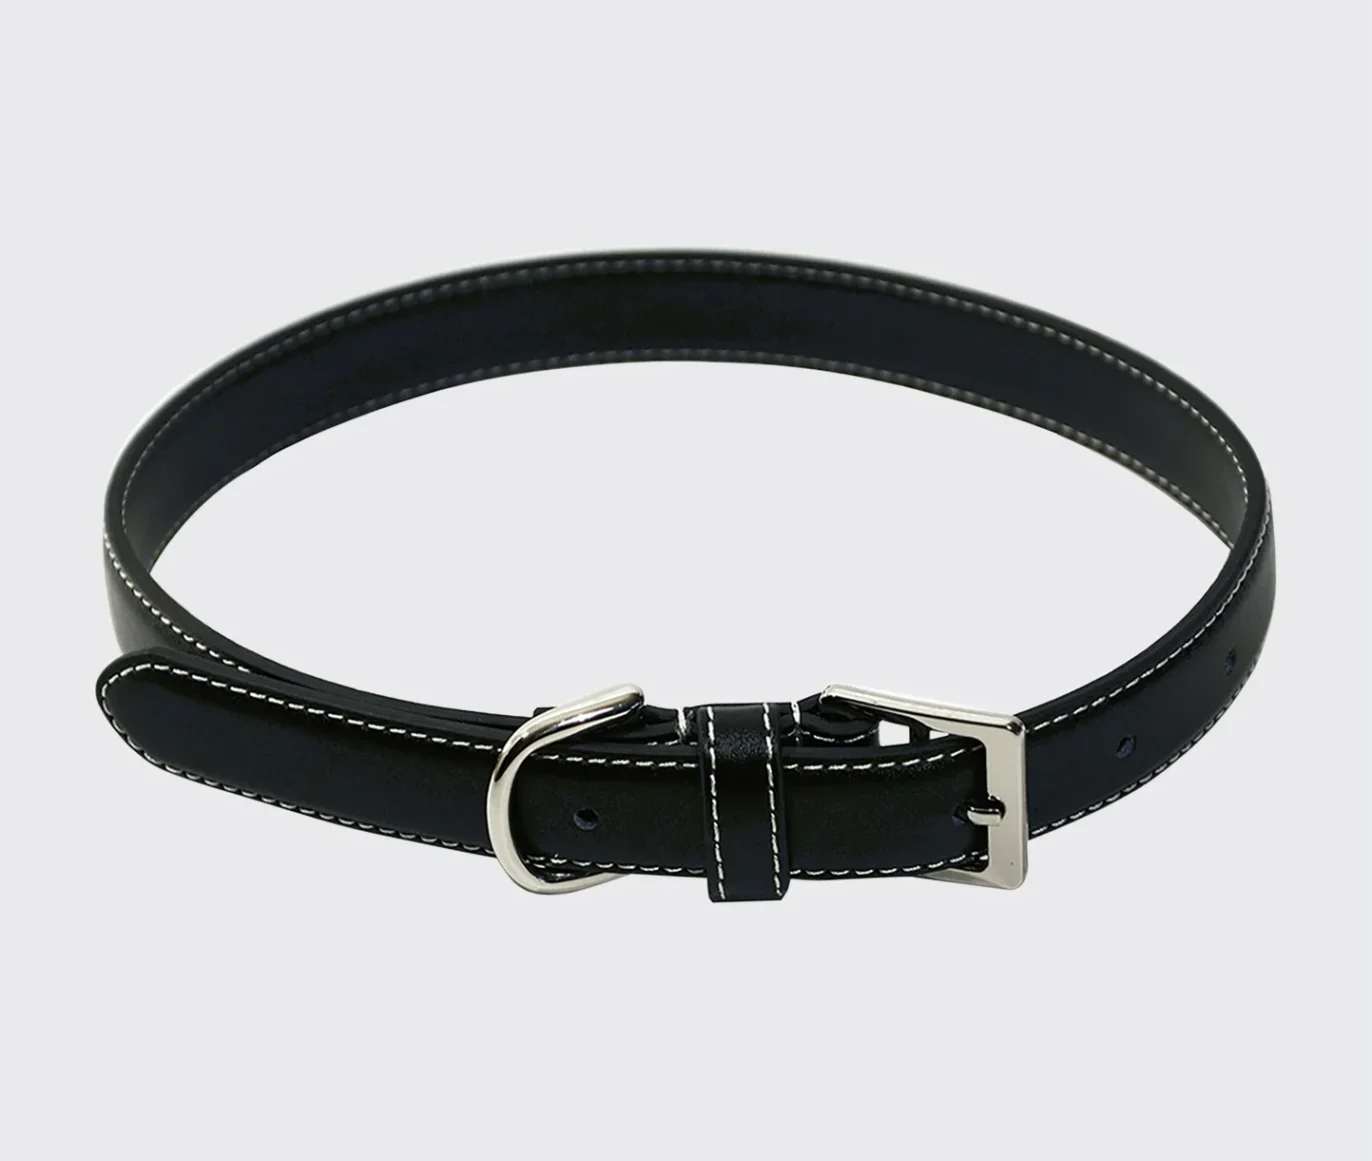 Chic designer dog collars to shop for your pup: ROYCE NEW YORK Medium Luxe Dog Collar